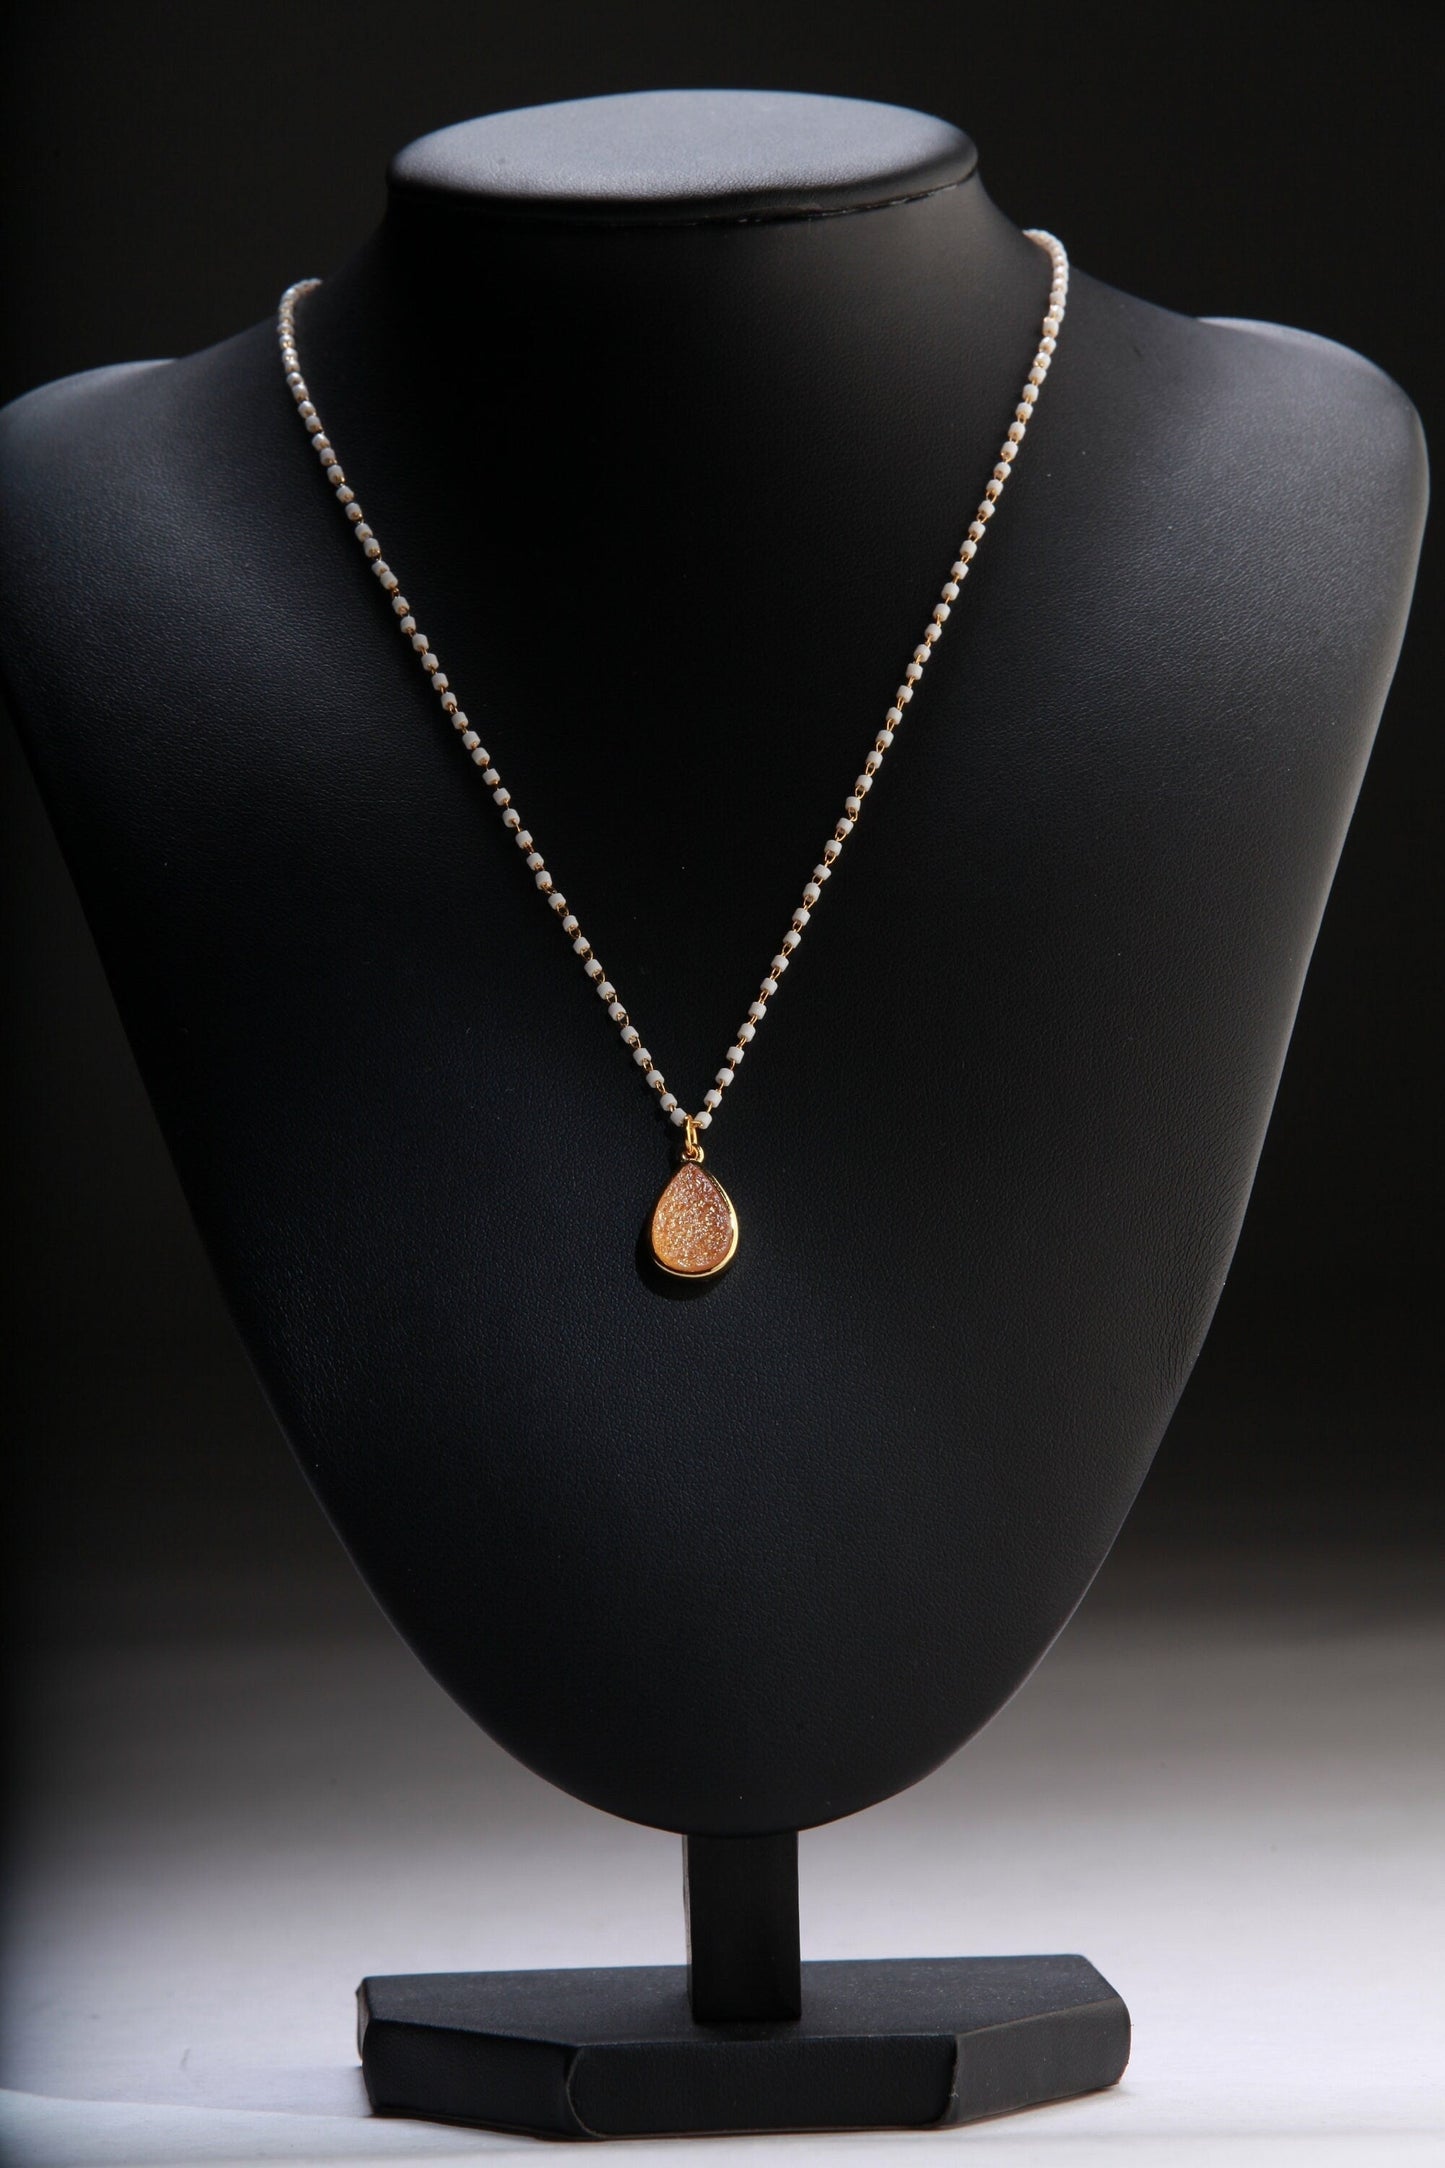 Genuine Druzy Agate Geode Gemstone Gold Pendant with Beaded Chain Necklace Available in 16&quot;, 18&quot; and 20&quot;